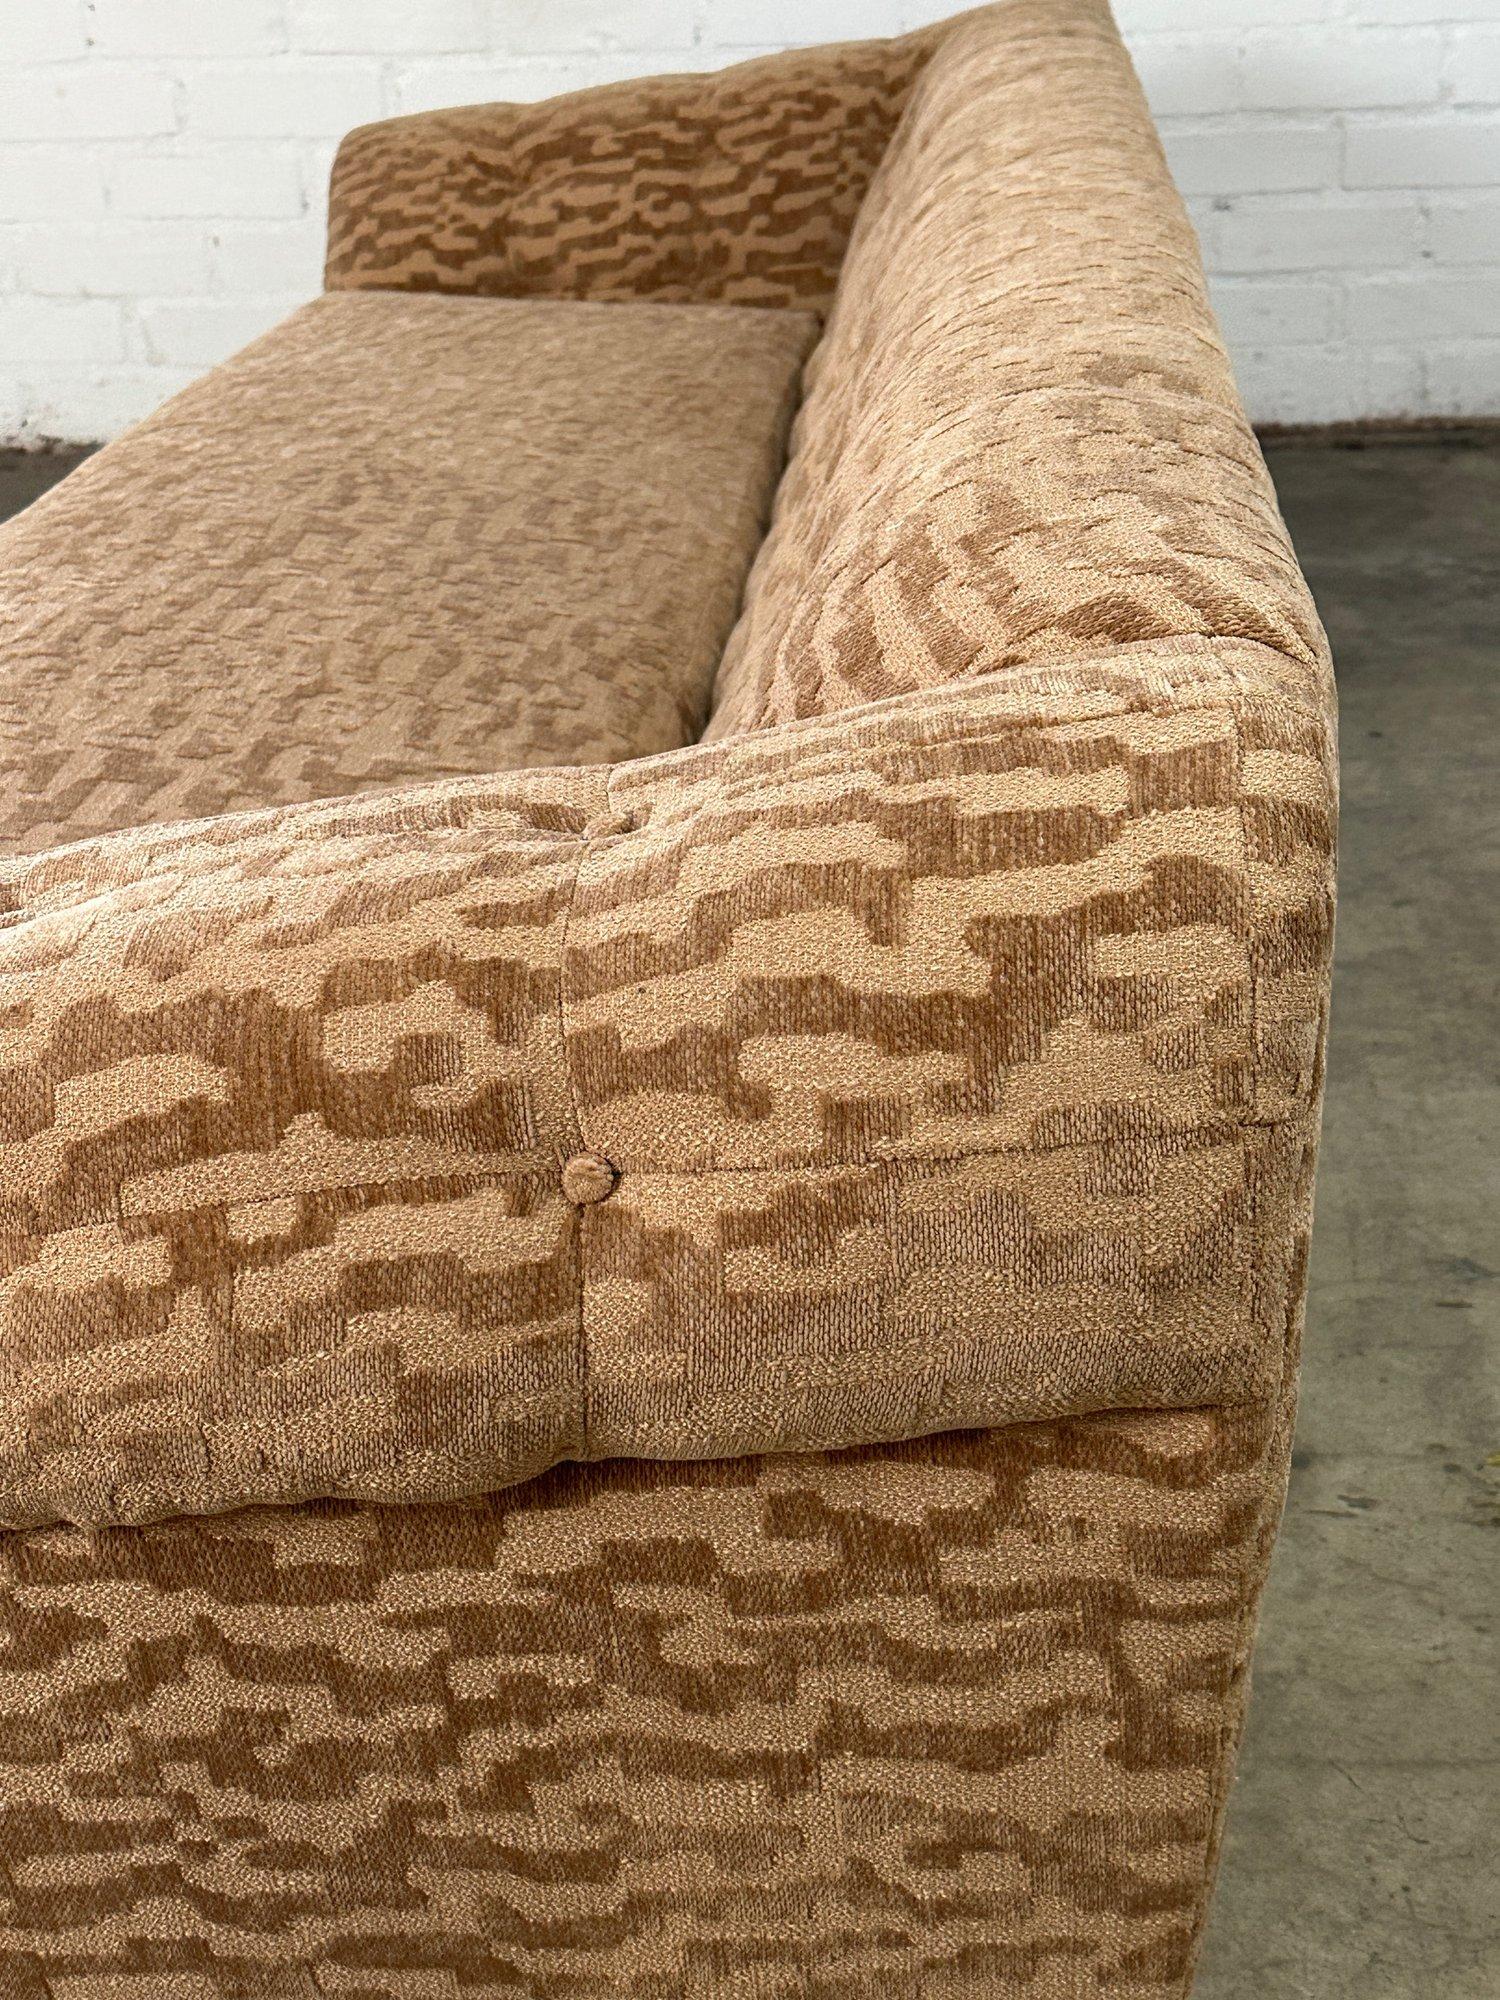 Low Profile Sofa in Patterned Chenille In Good Condition For Sale In Los Angeles, CA